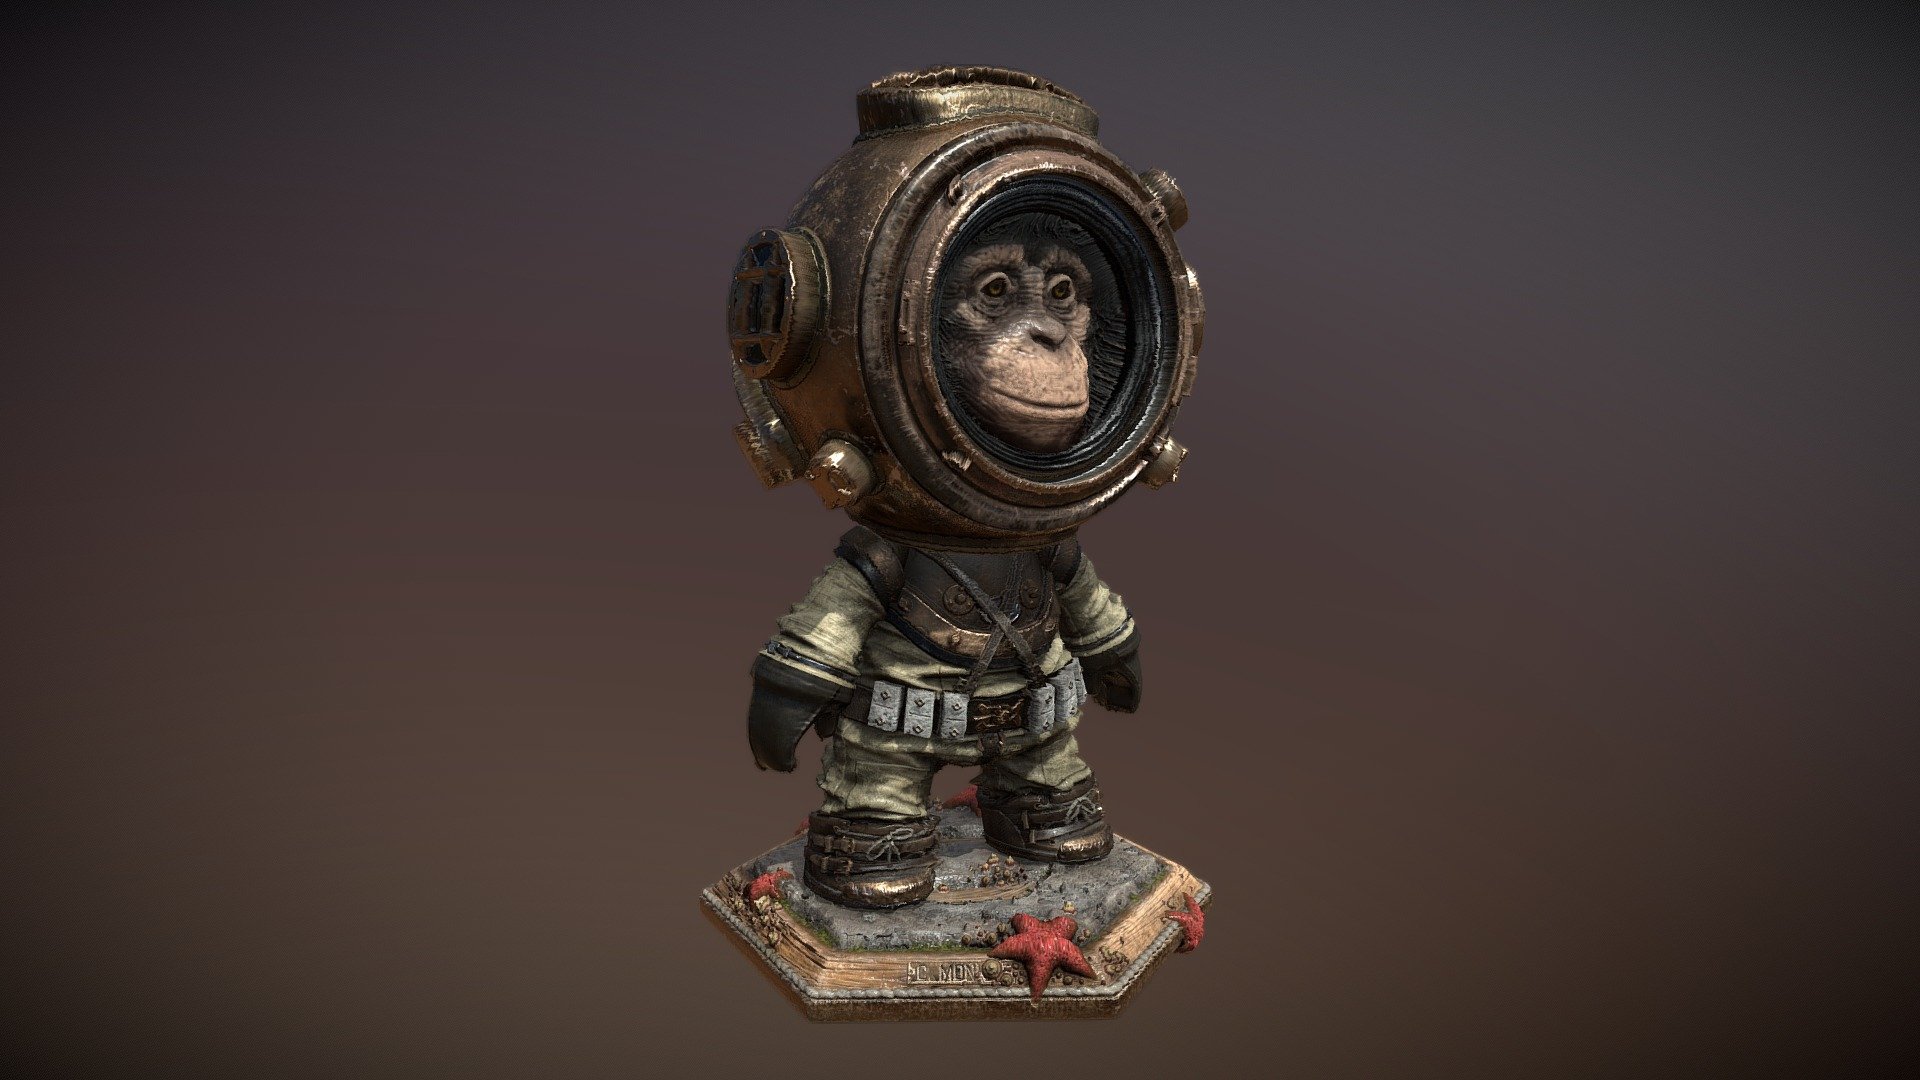 Sea Monkey was my entry to the Meet Mat 2 Substance Painting contest. I'm not sure what other sea monkeys you might know, but this one is the bravest of them all. I had a lot of fun texturing this exclusively in Substance Painter, as it was a great way to explore displacement + IRAY rendering. I also embraced the power of Painter's anchor system, which made late revisions a breeze- I can't work without them now. It's been great seeing all the other entries&hellip; there's so much talent out there! - Meet MAT2: Sea Monkey - 3D model by tundrashift 3d model